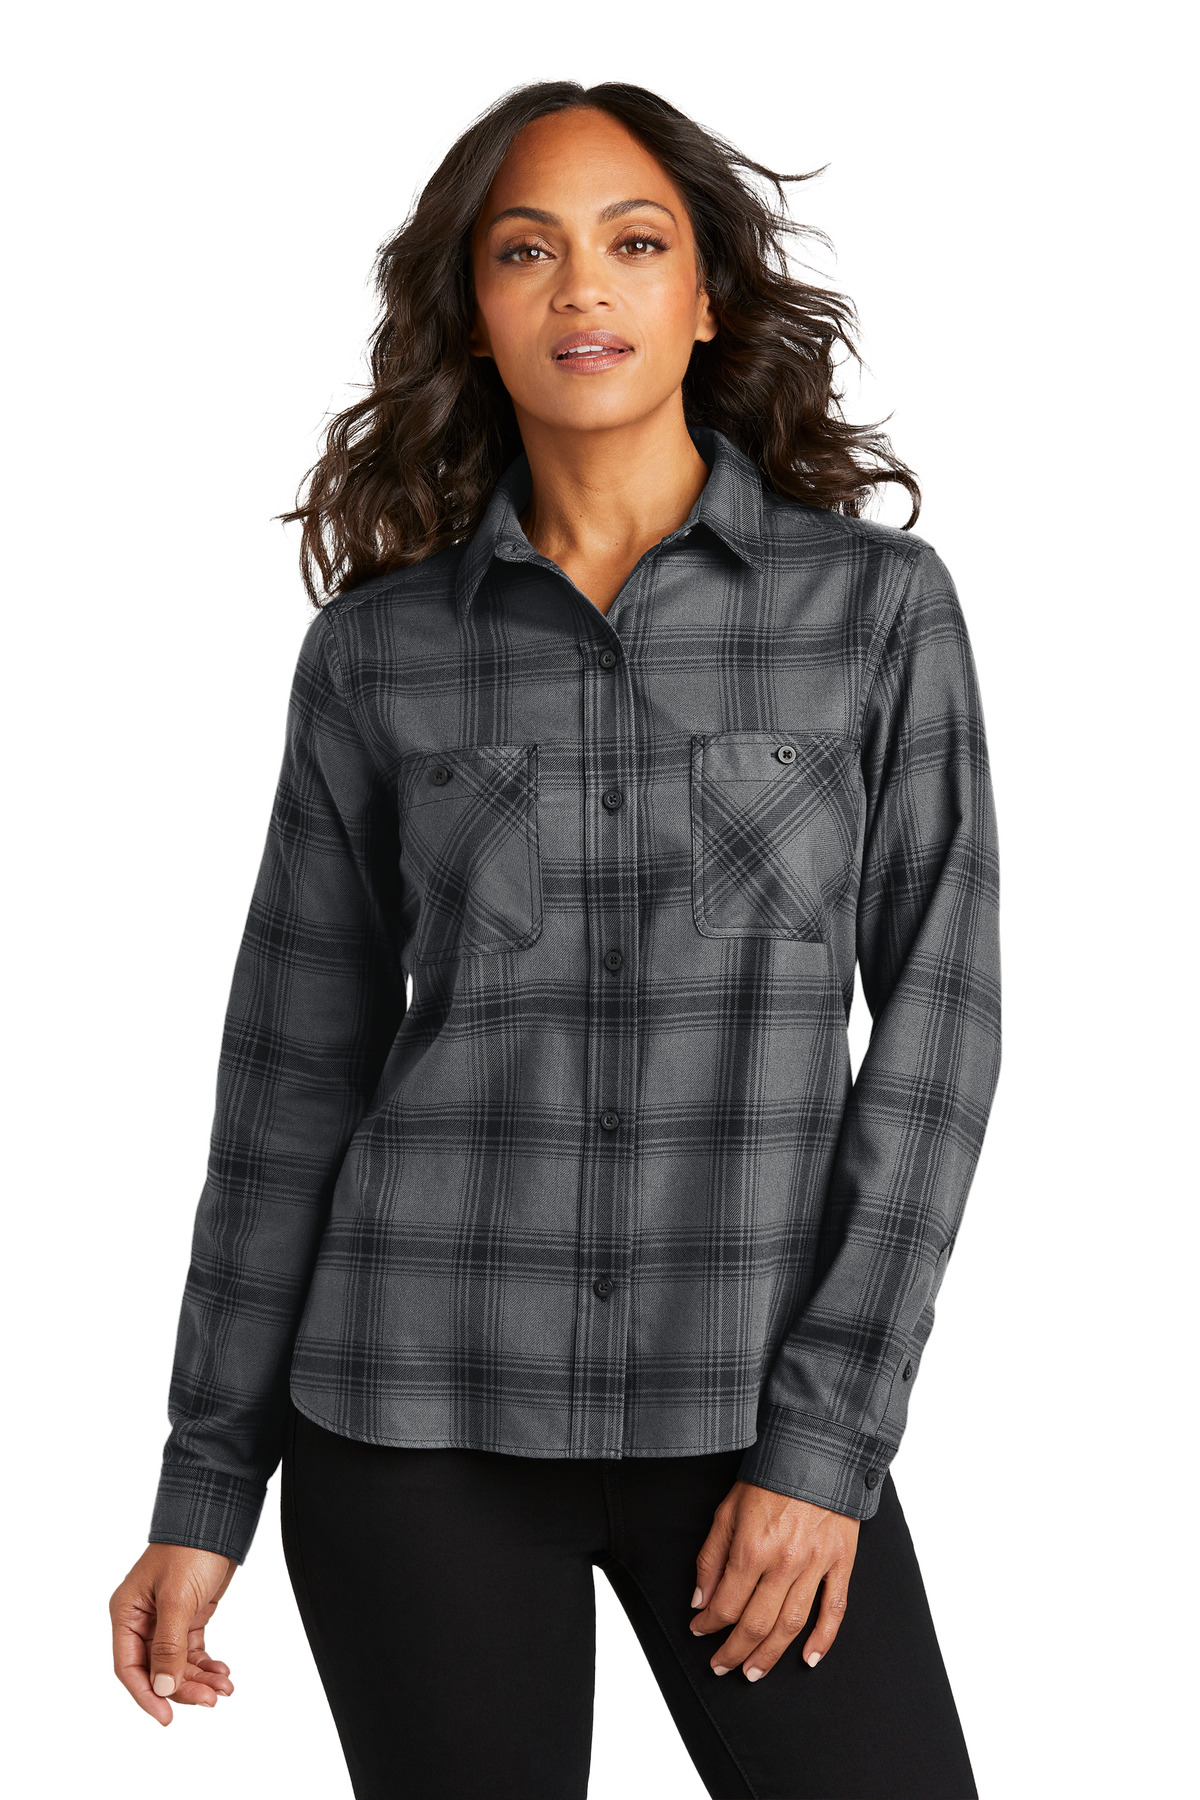 click to view Grey/ Black Open Plaid